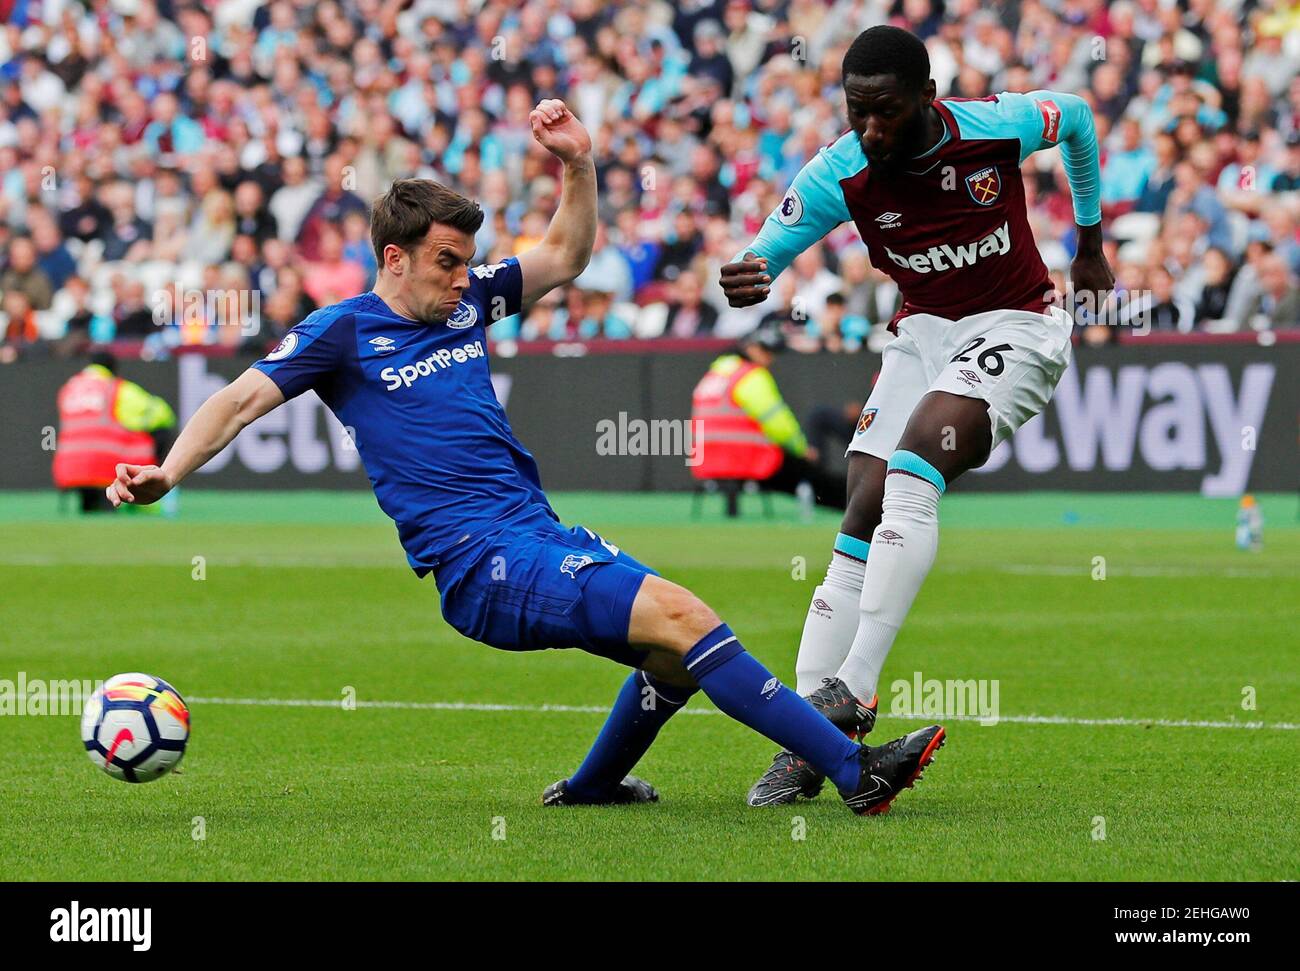 Soccer Football - Premier League - West Ham United vs Everton - London Stadium, London, Britain - May 13, 2018   Everton's Seamus Coleman in action with West Ham United's Arthur Masuaku    REUTERS/Eddie Keogh    EDITORIAL USE ONLY. No use with unauthorized audio, video, data, fixture lists, club/league logos or "live" services. Online in-match use limited to 75 images, no video emulation. No use in betting, games or single club/league/player publications.  Please contact your account representative for further details. Stock Photo